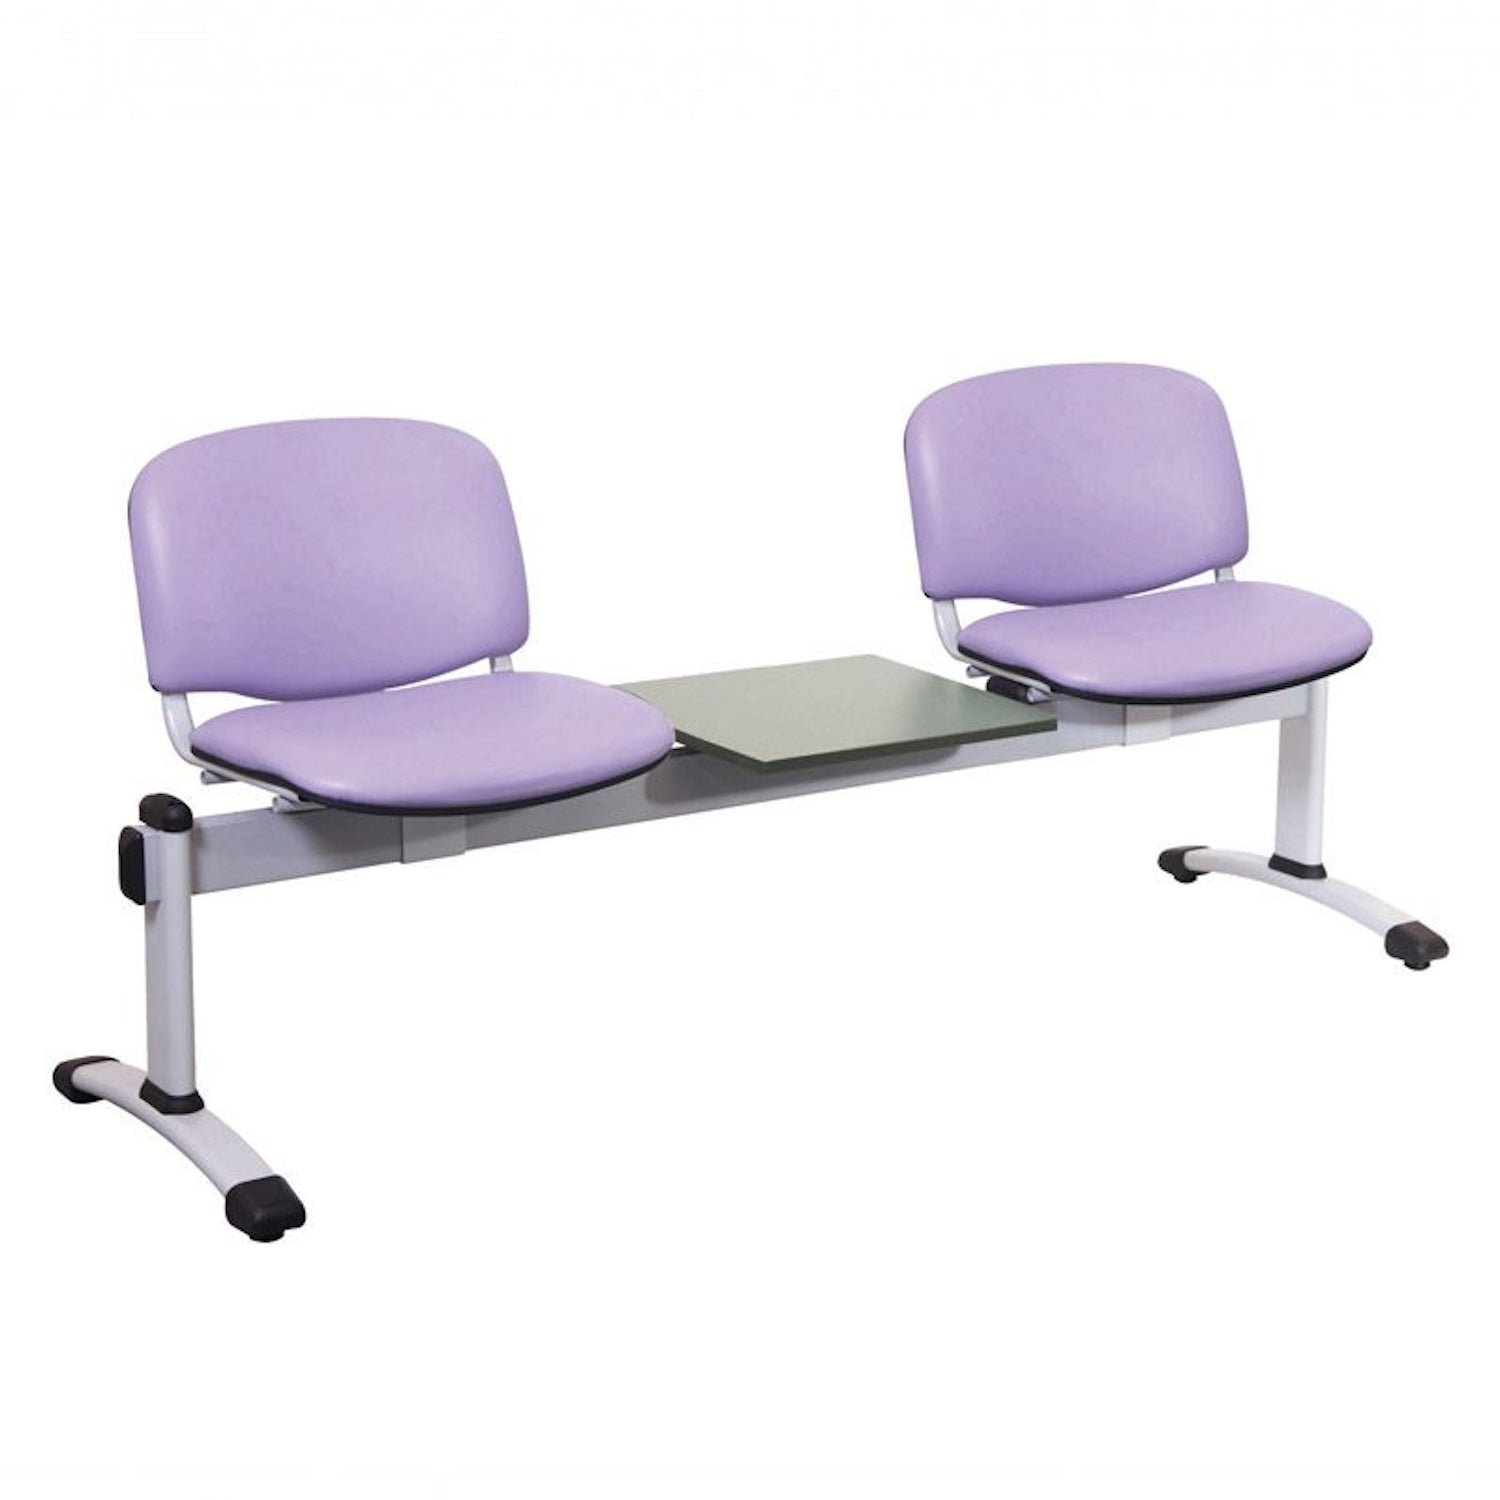 Sunflower Visitor 2 Anti-bacterial Vinyl Upholstery Seats & 1 Table Module in Lilac